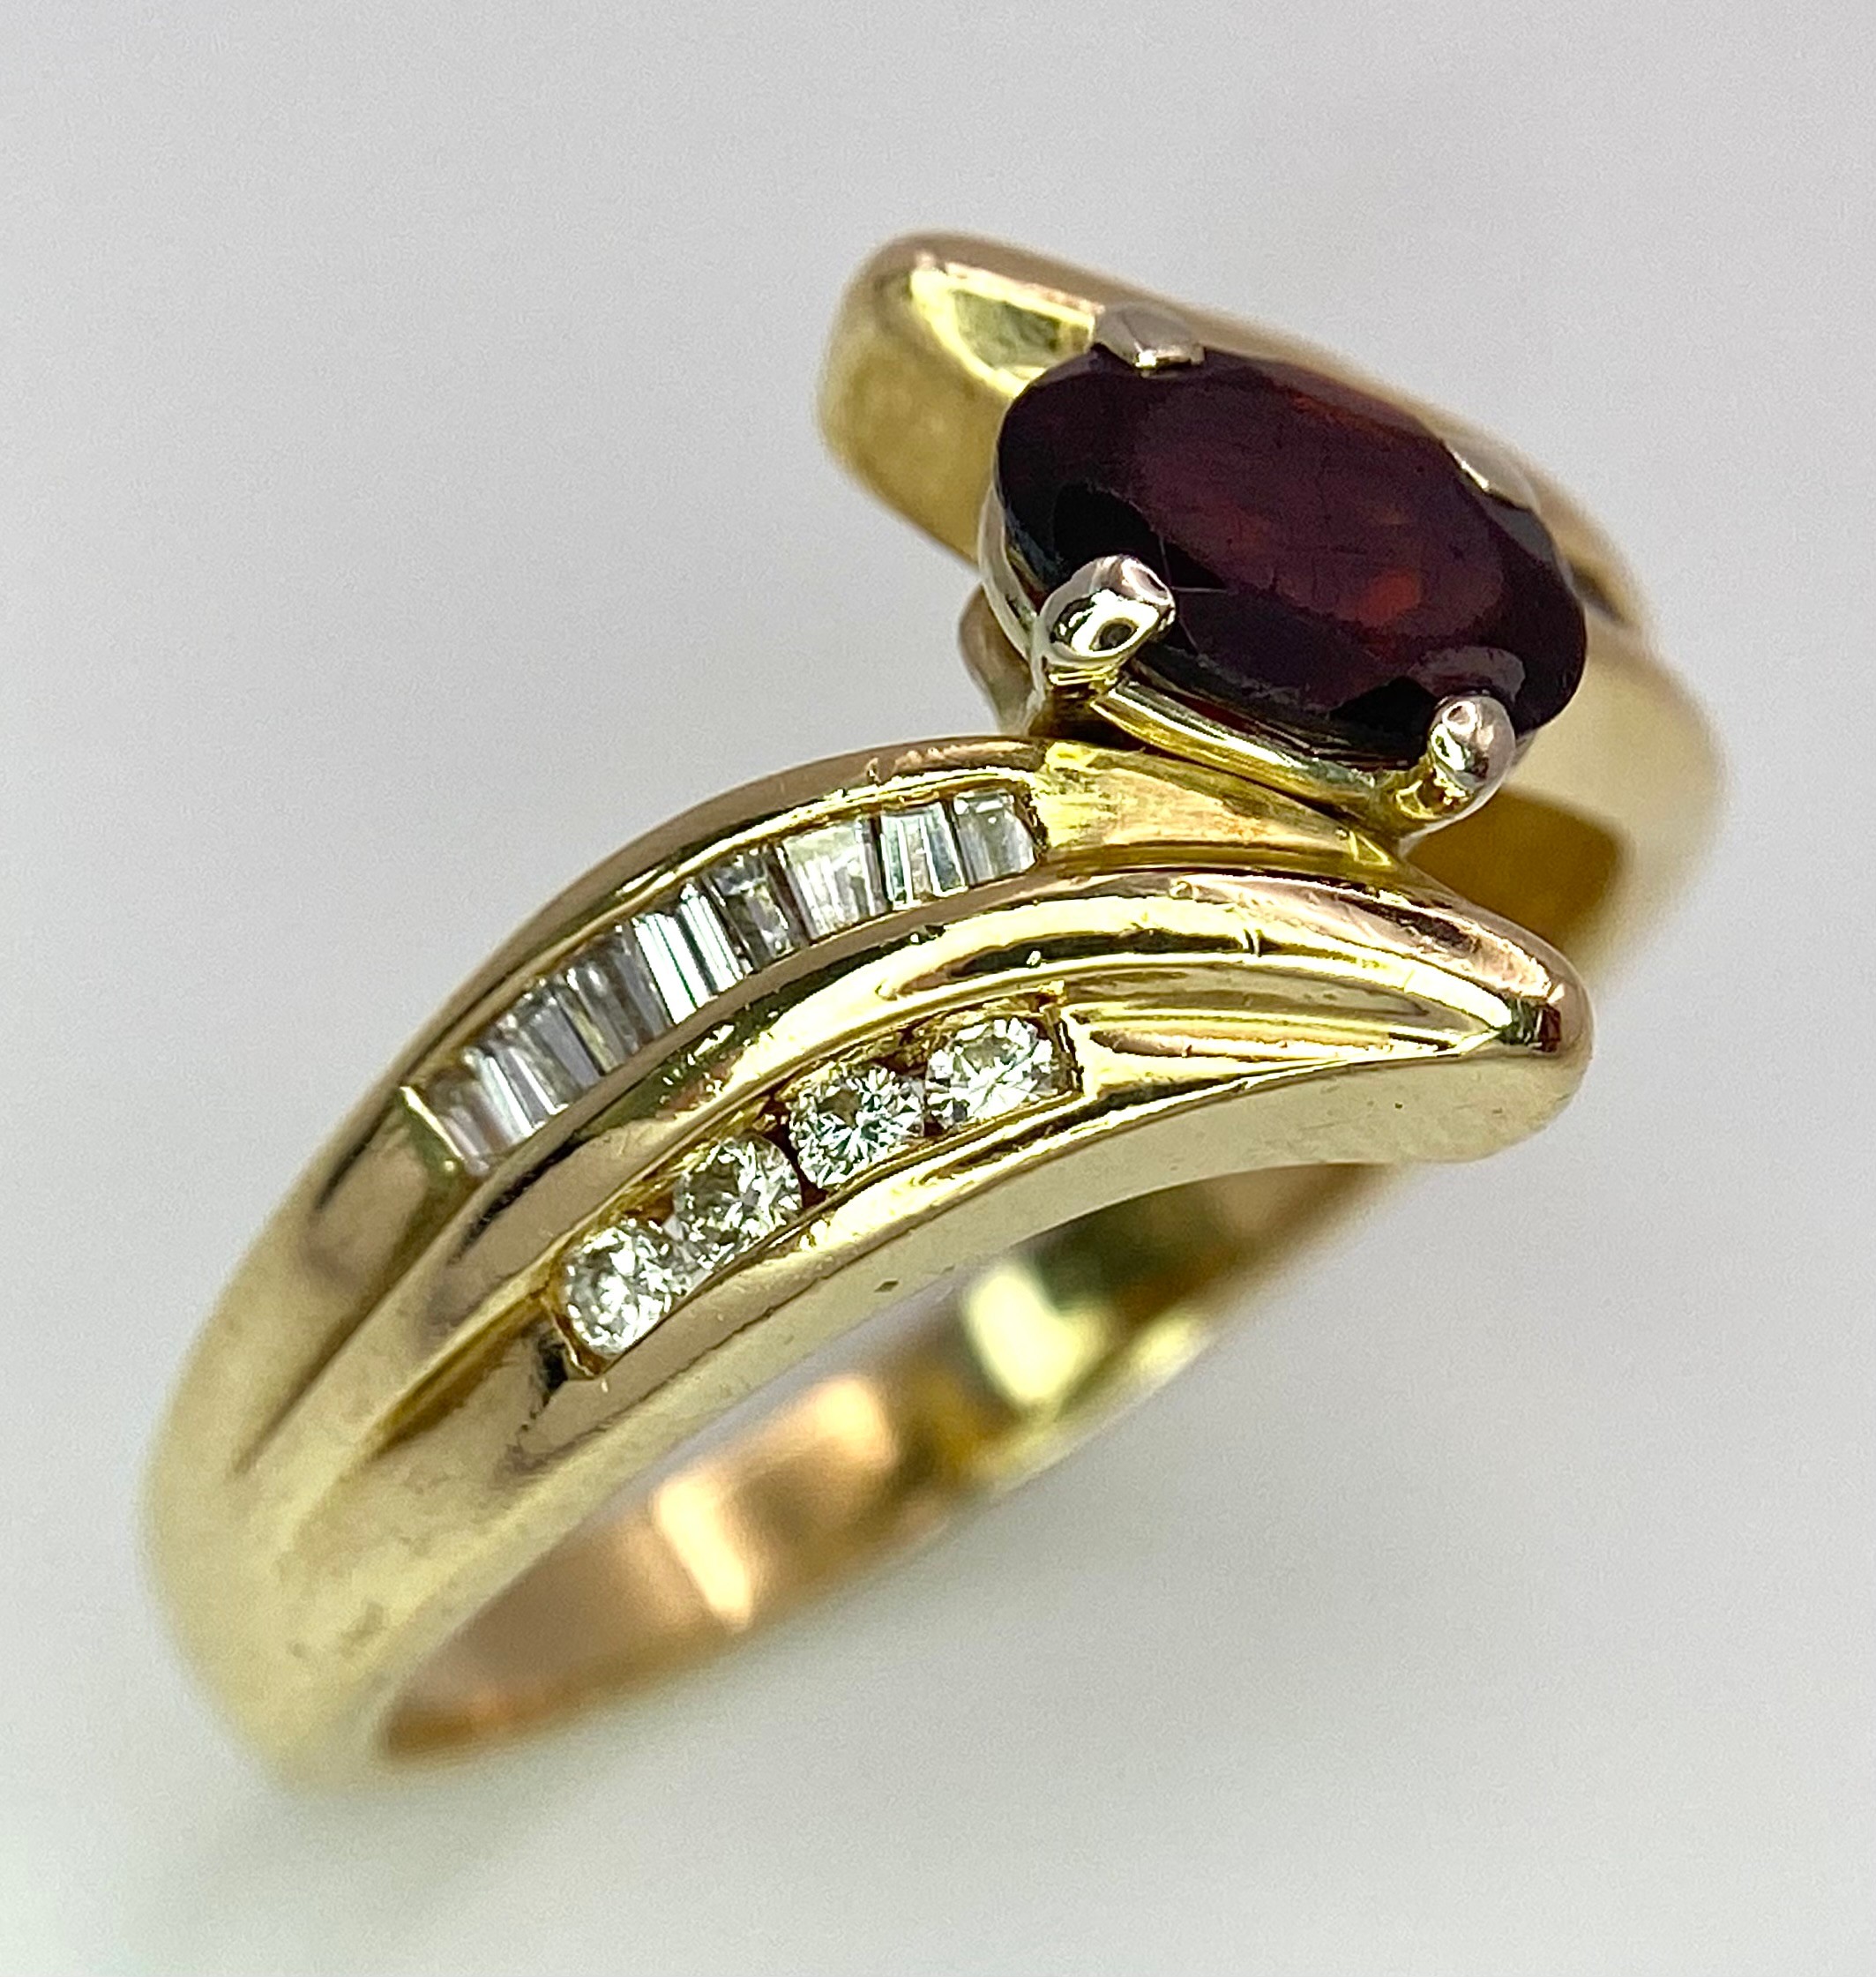 A 14K YELLOW GOLD DIAMOND & GARNET TWISTED RING 0.20CT 5.4G SIZE R SC 9074 - Image 2 of 6